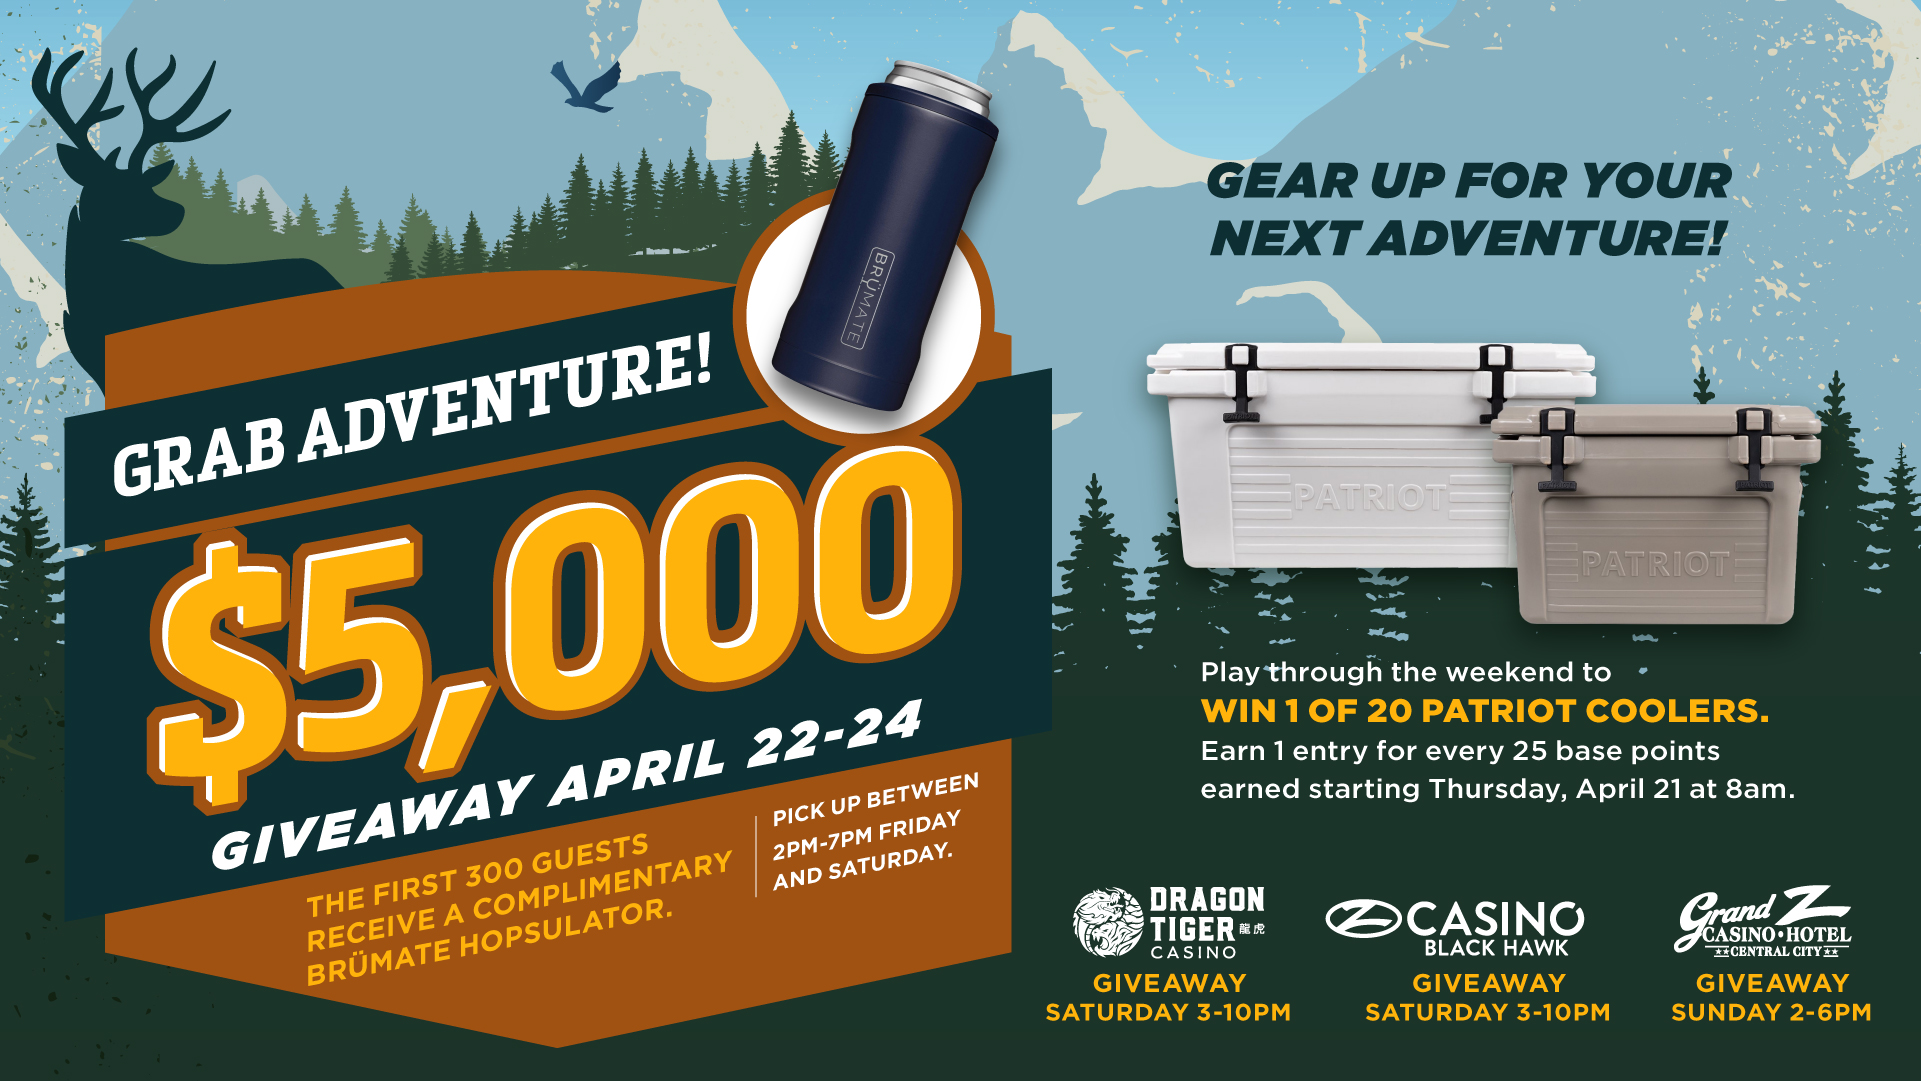 Grab Adventure! $5,000 Giveaway April 22-24 Gear up for your next adventure. The first 3000 guests receive a complimentary Brumate Hopsulator. Pick up between 2pm-7pm Friday and Saturday Pay through the weekend to win 1 of 20 Patriot coolers Earn 1 entry for every 25 base points earned starting Thrusday, April 21 at 8am.